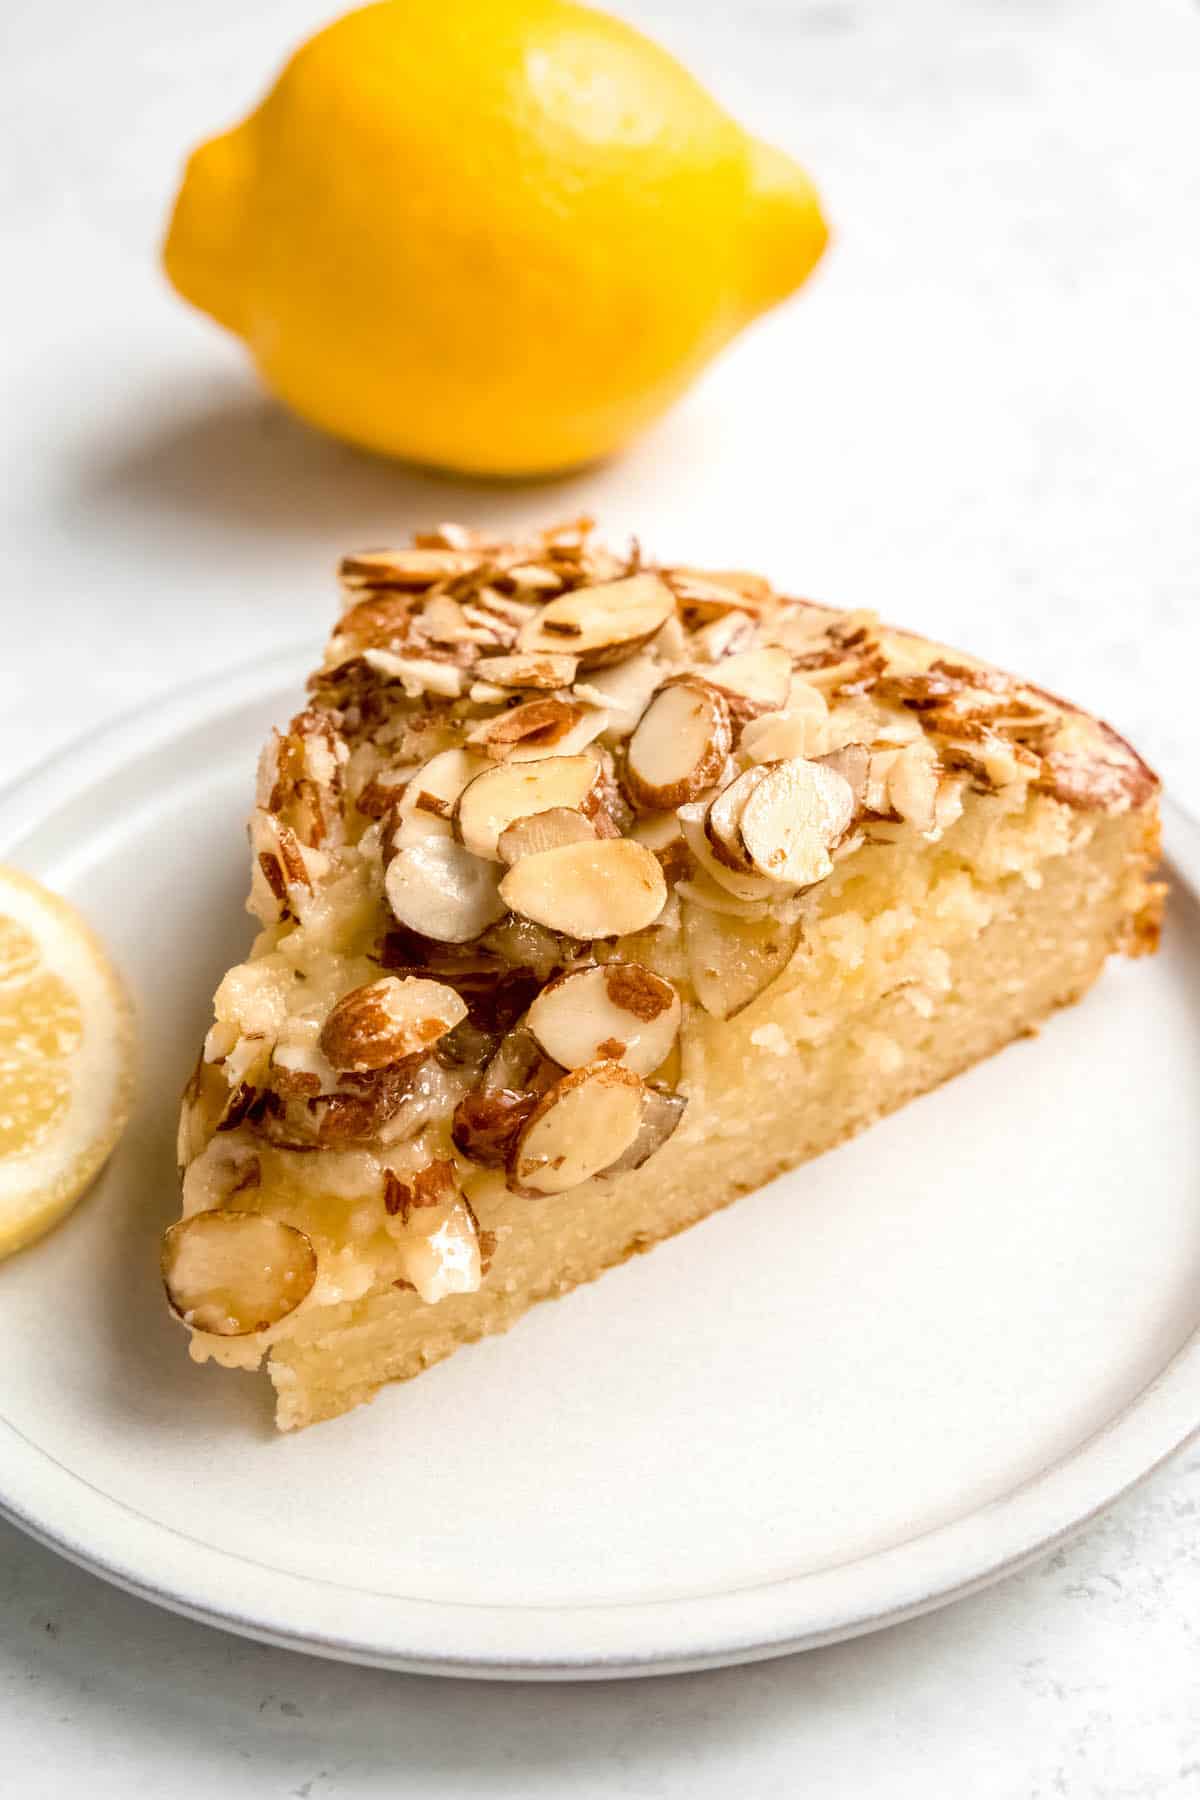 slice of Italian ricotta cake with lemons and almonds on a white dessert plate with a lemon in the background.